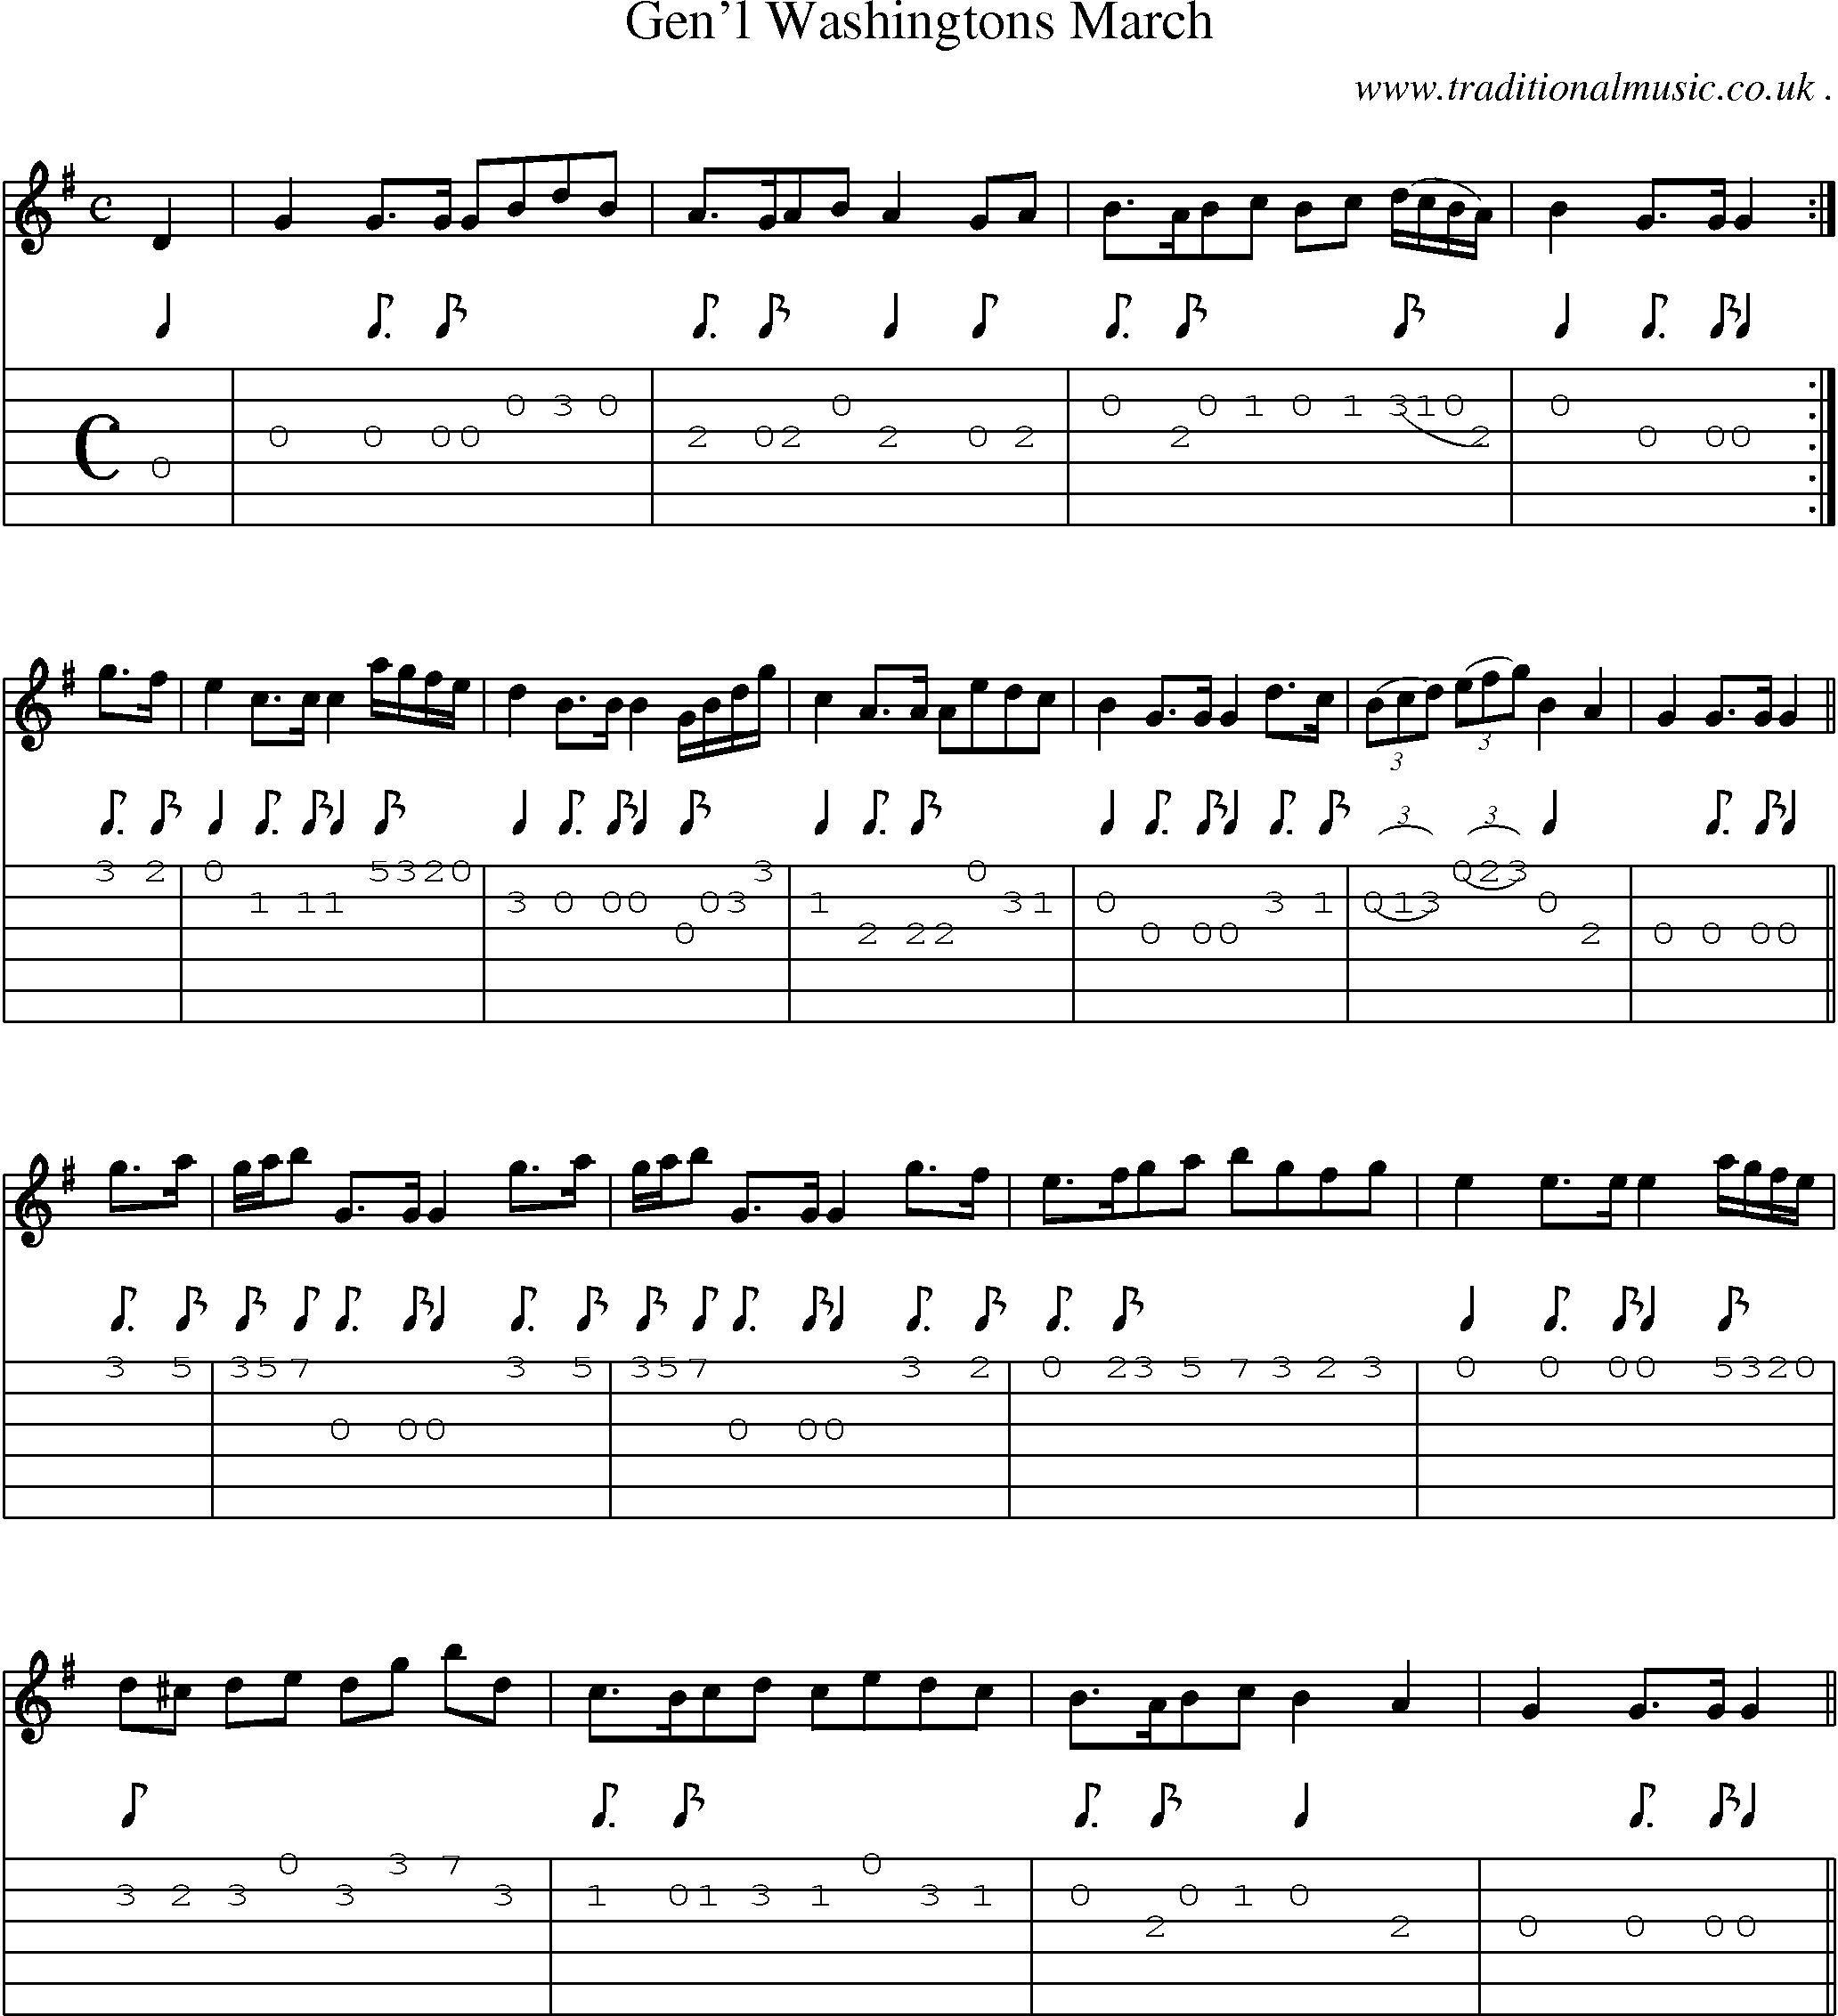 Sheet-Music and Guitar Tabs for Genl Washingtons March